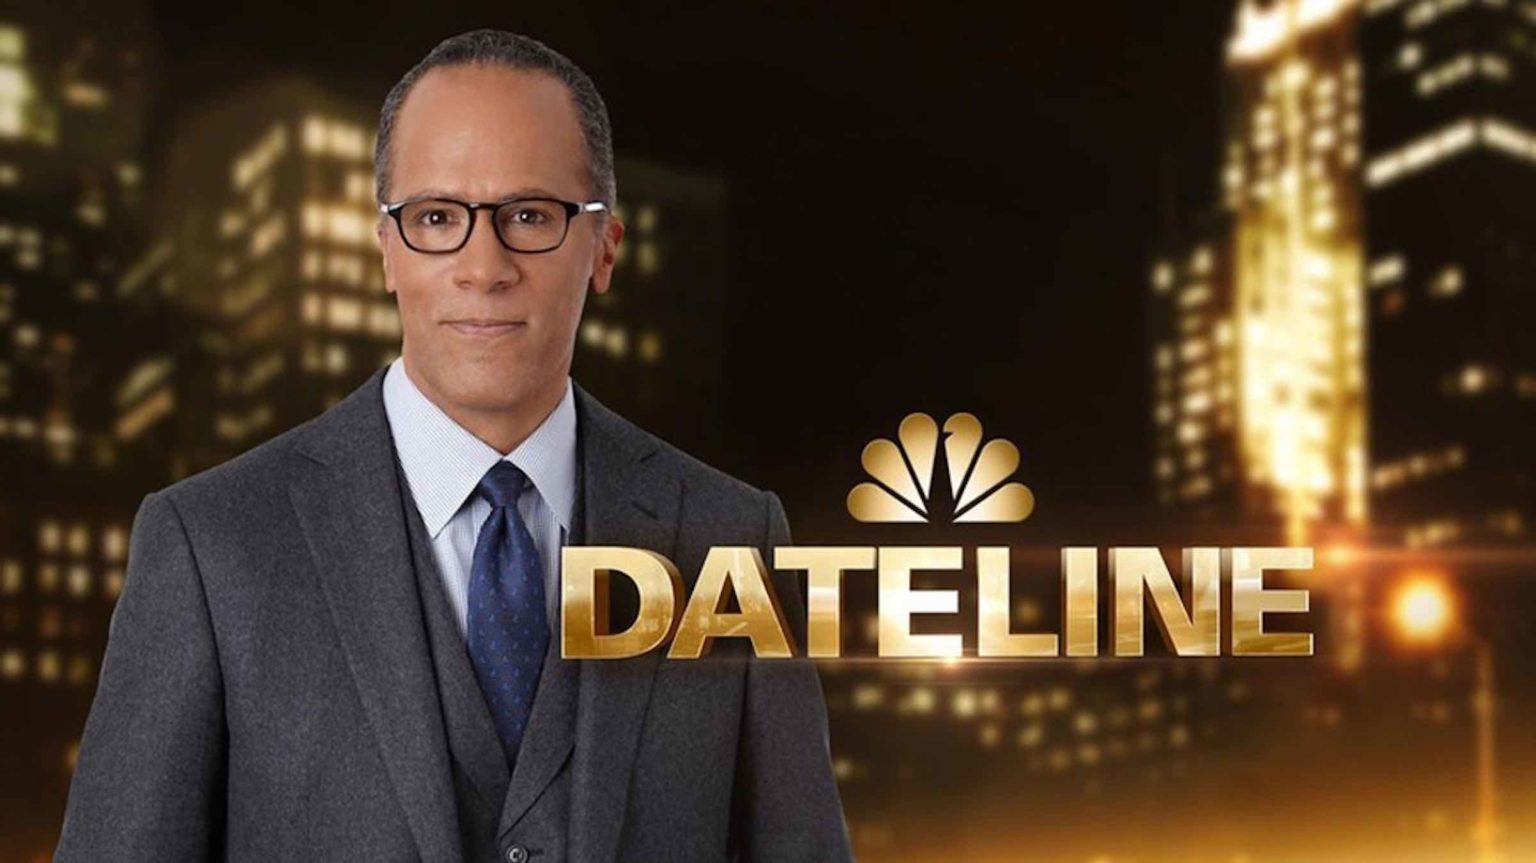 You know what they say, “true crime, glass of wine, bed by nine”. Need a great murder story? Here are the episodes to watch on NBC's 'Dateline' tonight!